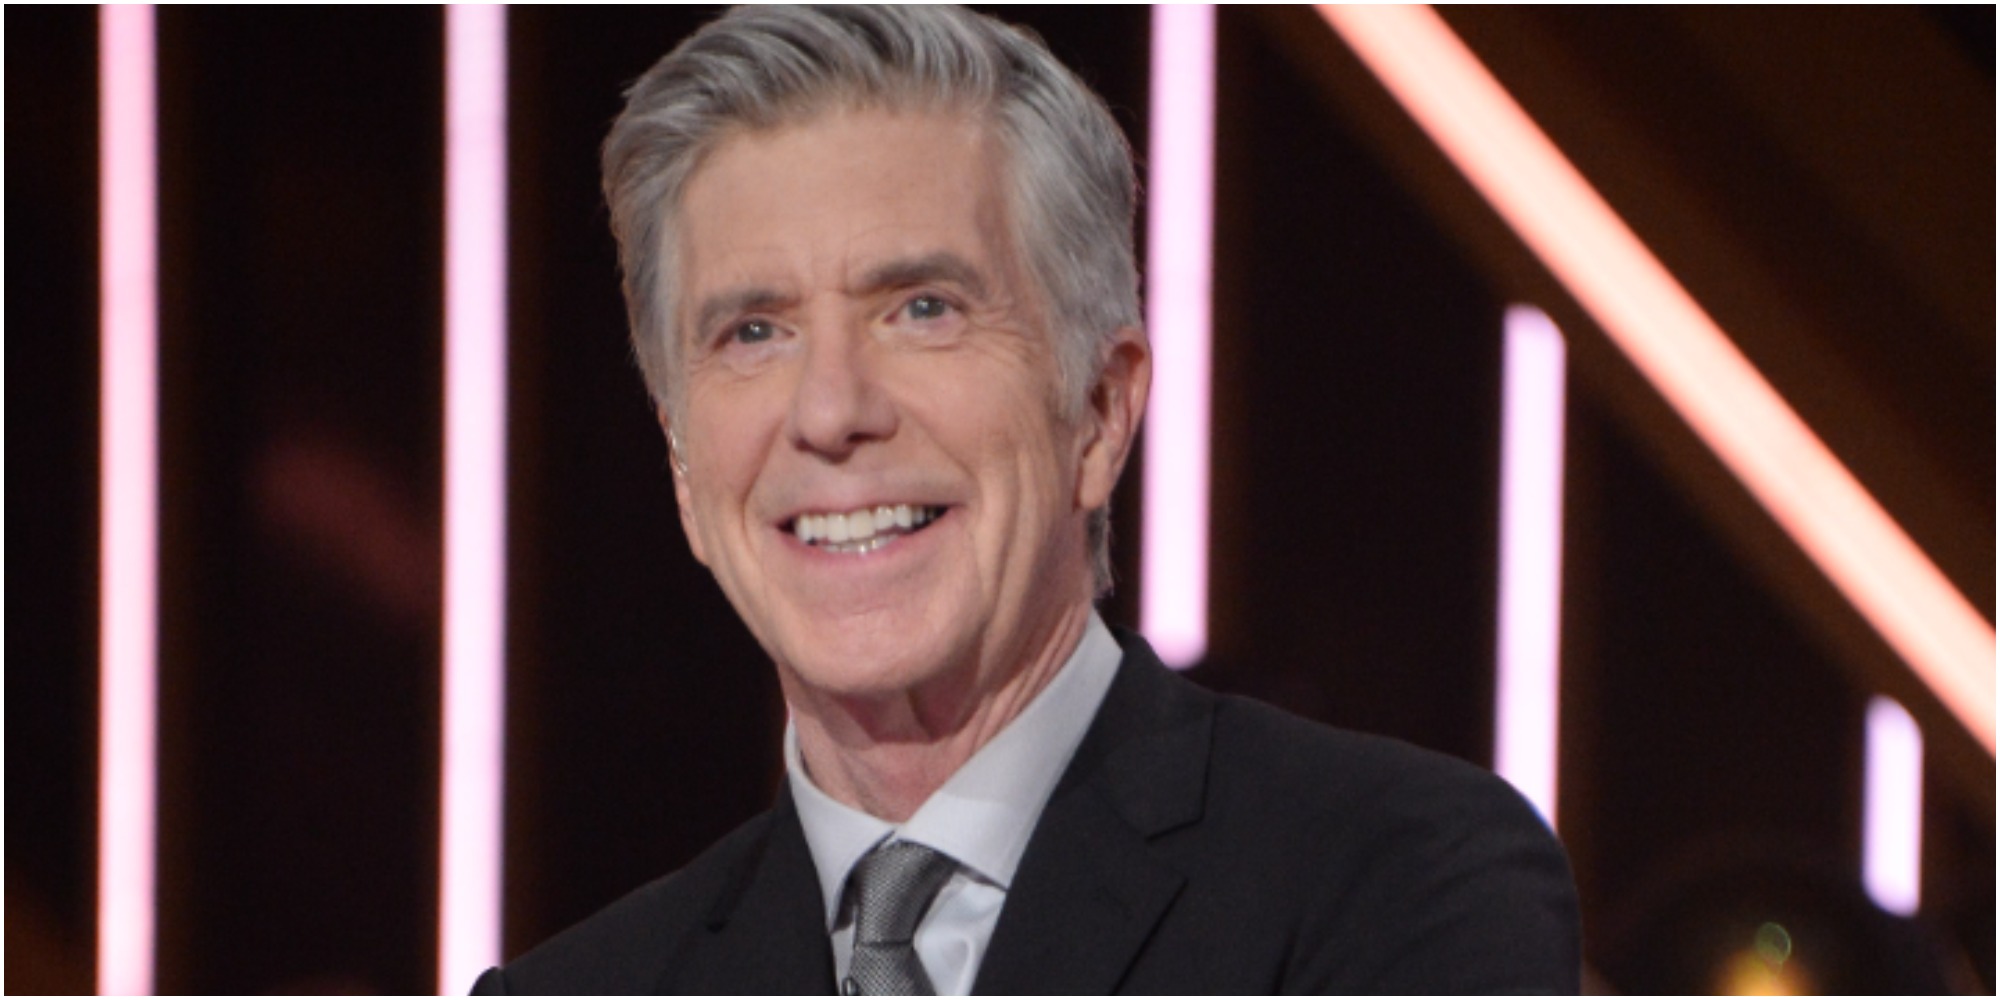 Tom Bergeron confirmed that he was fired from "Dancing With the Stars."